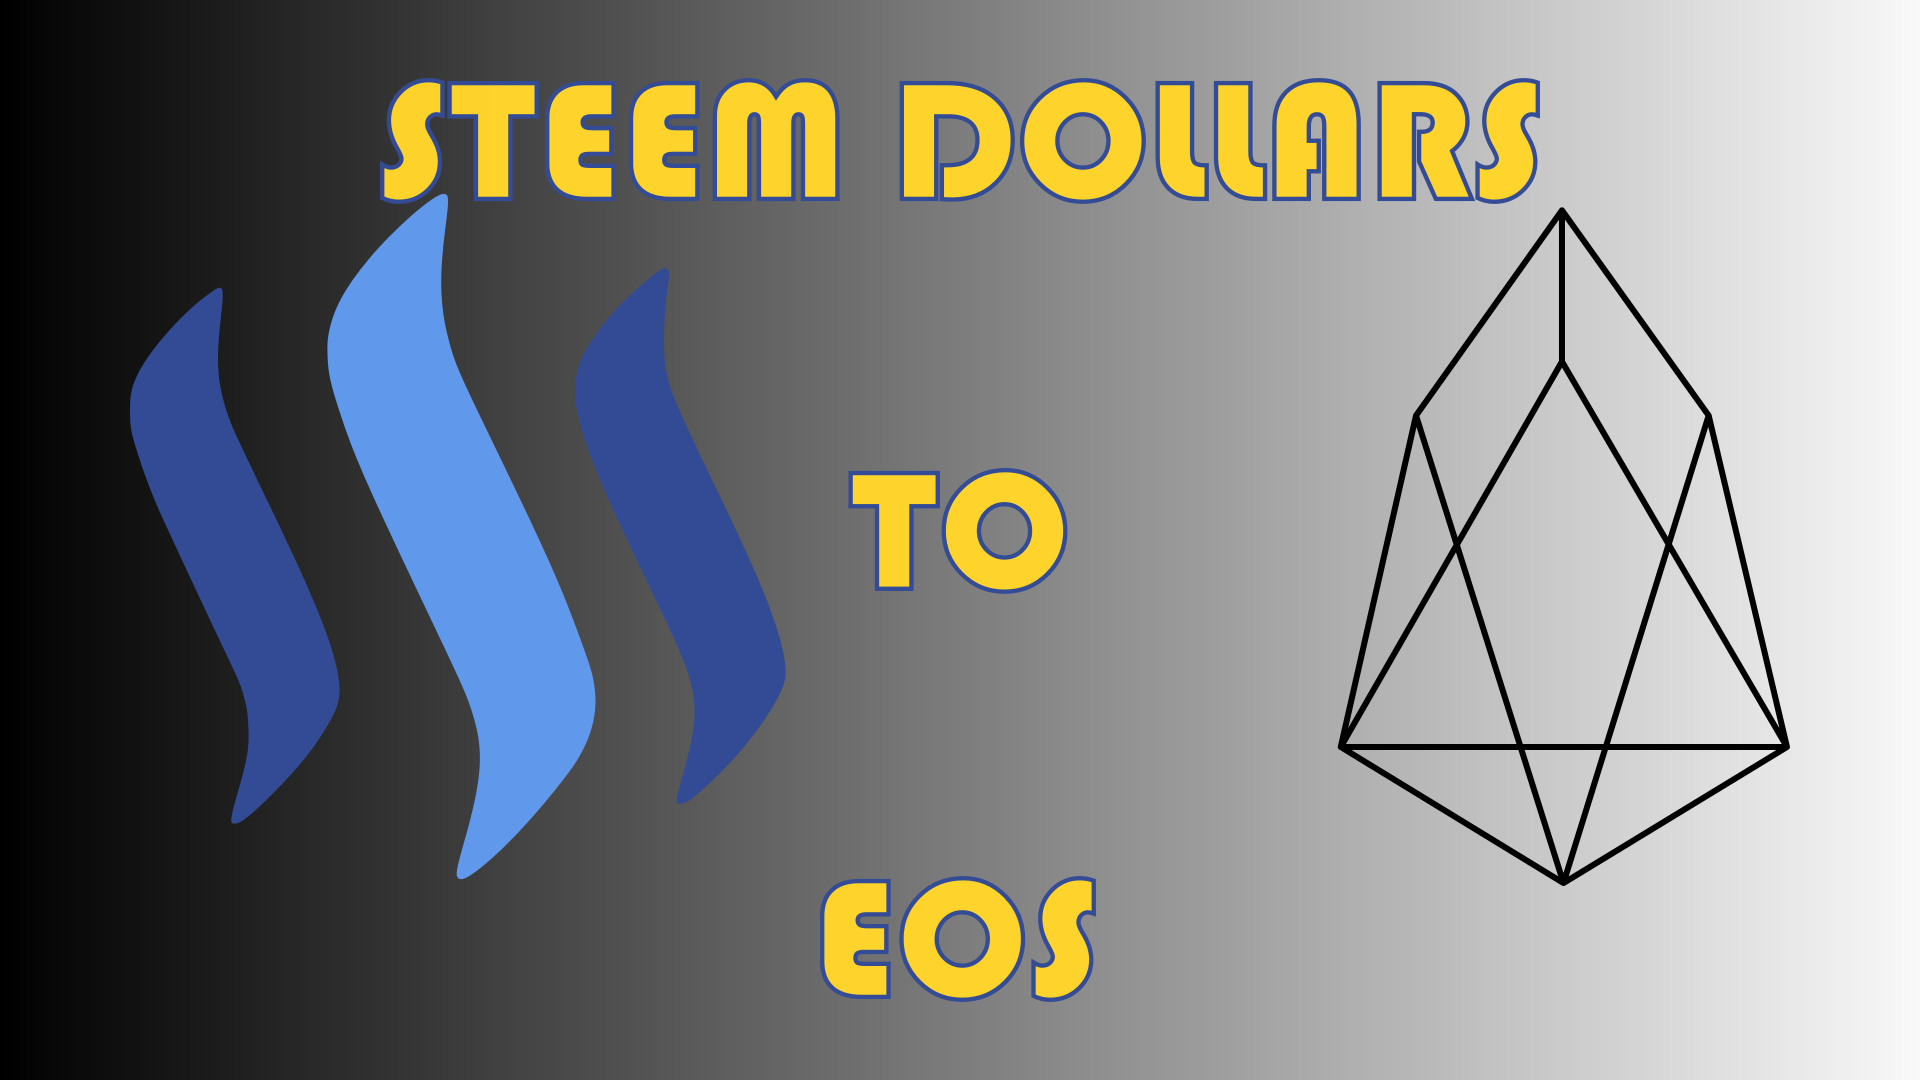 sbd to eos.png